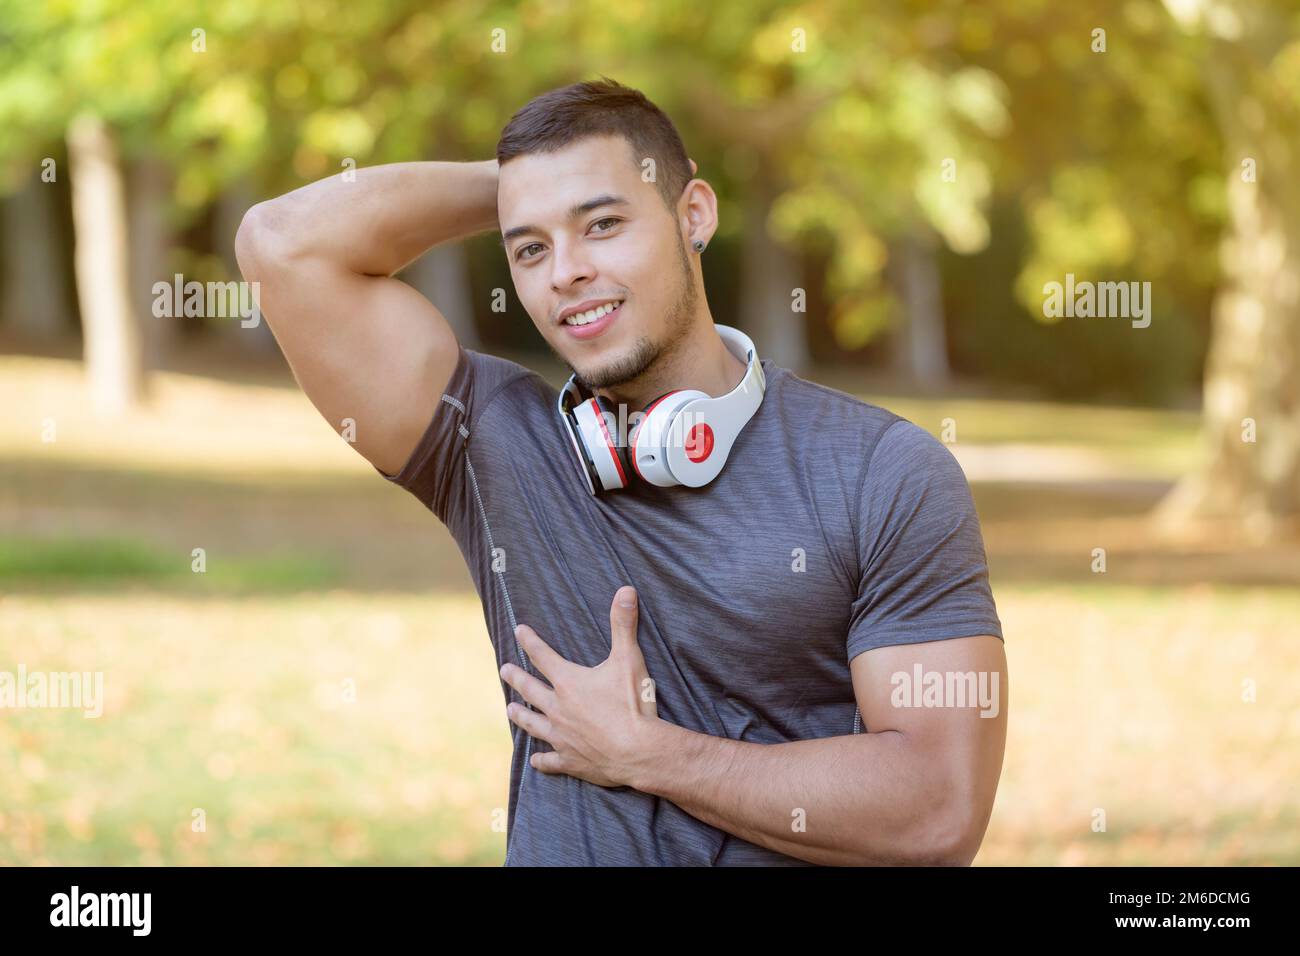 Flexing muscles posing runner young latin man running jogging sports training fitness workout Stock Photo